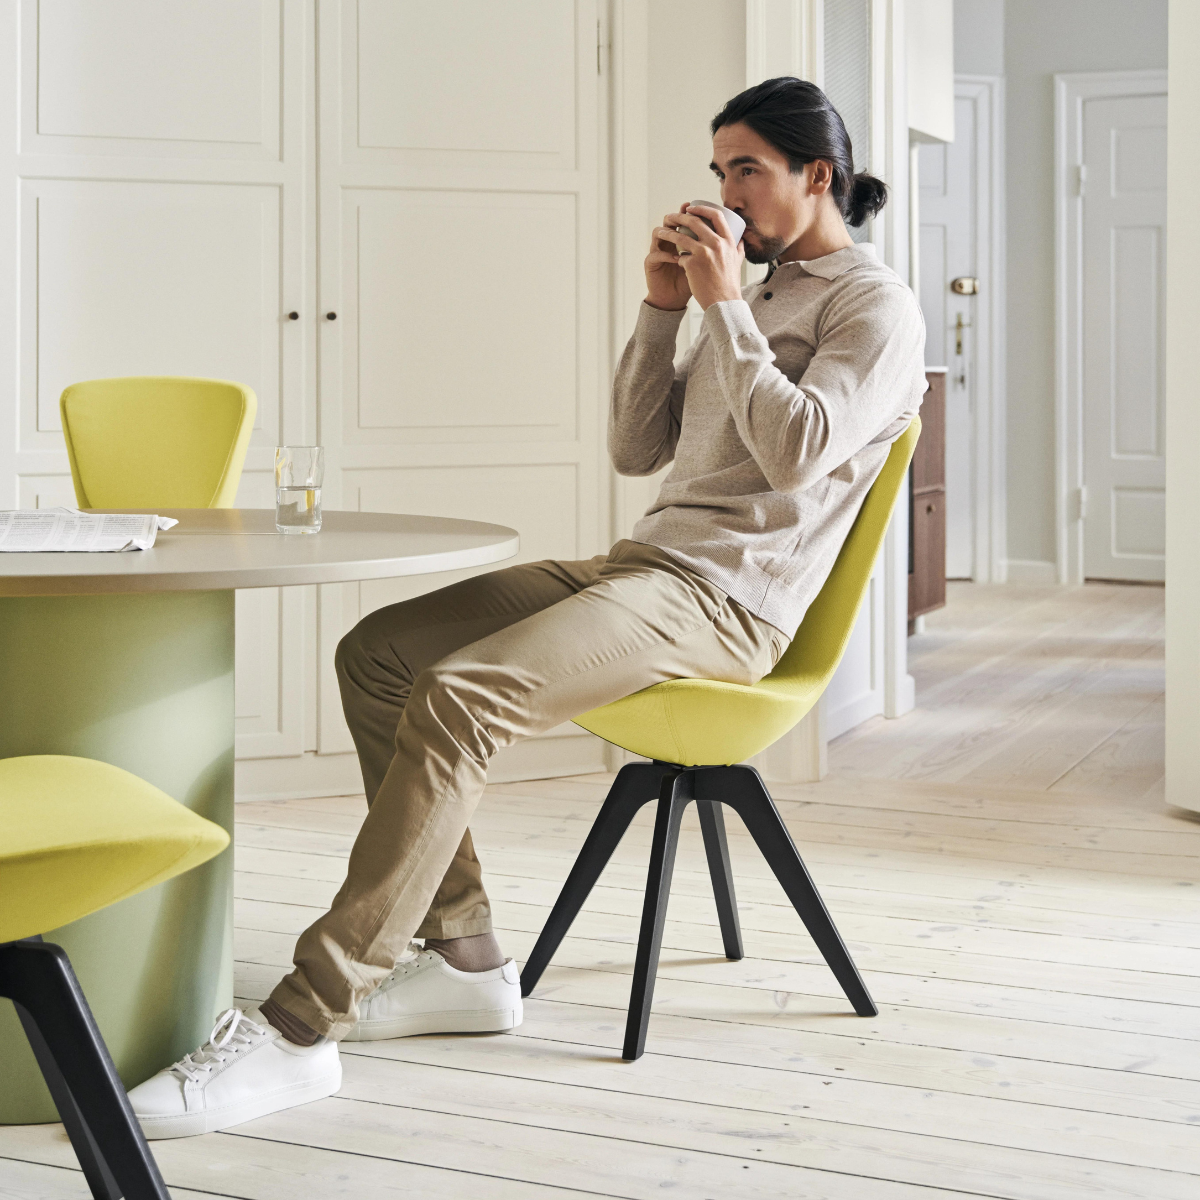 Invite Chair by Varier - Yellow - Home Usage by a young man enjoying his coffee